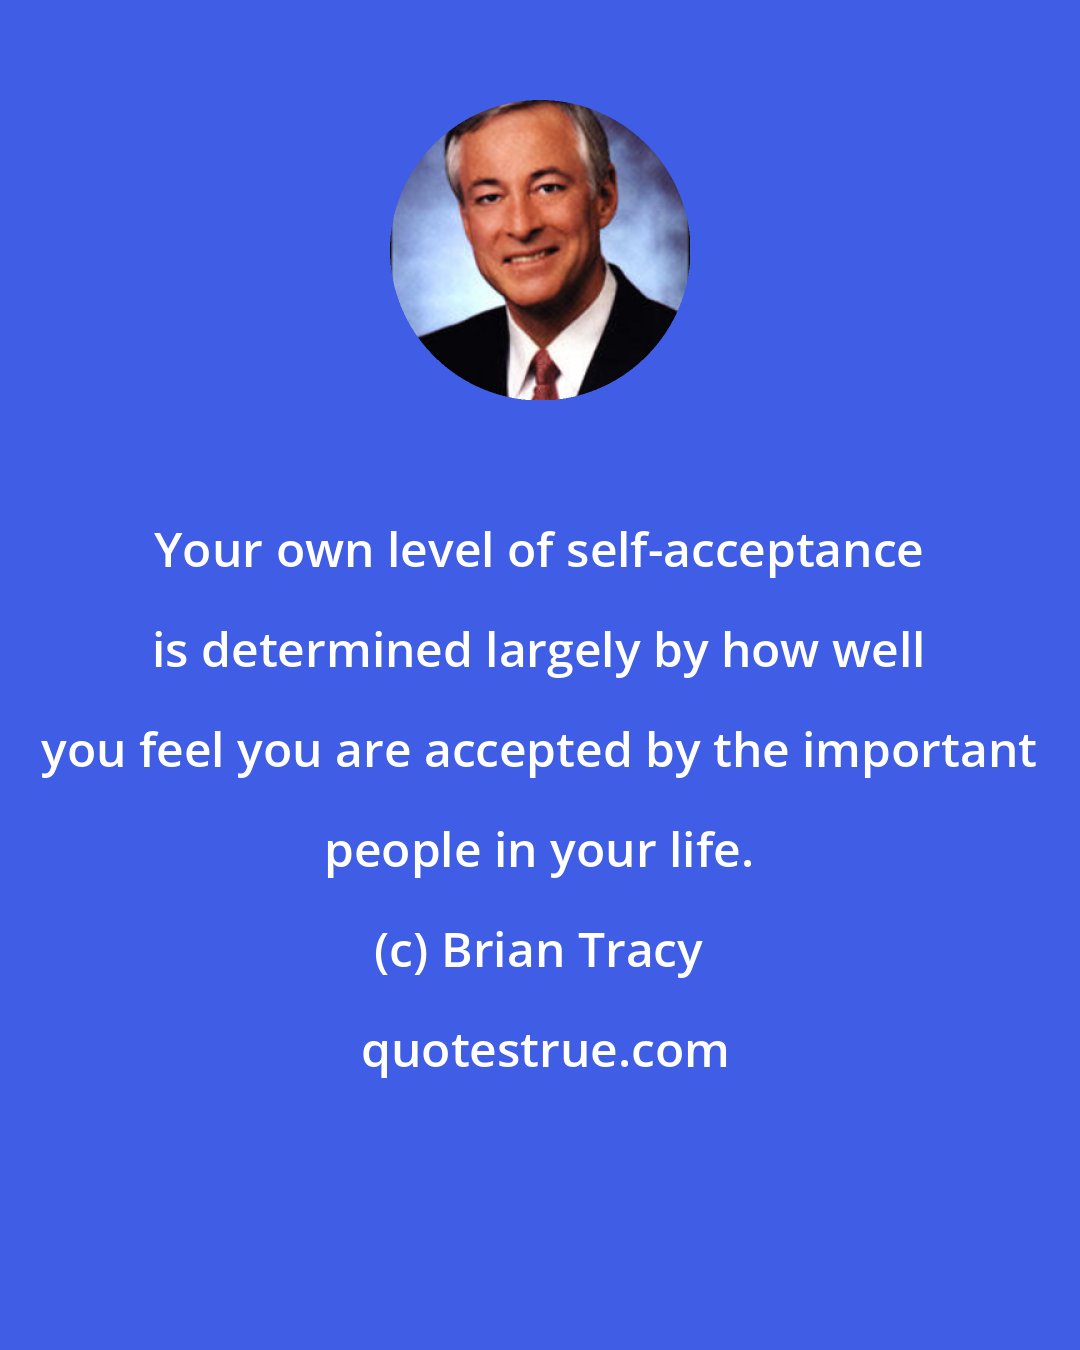 Brian Tracy: Your own level of self-acceptance is determined largely by how well you feel you are accepted by the important people in your life.